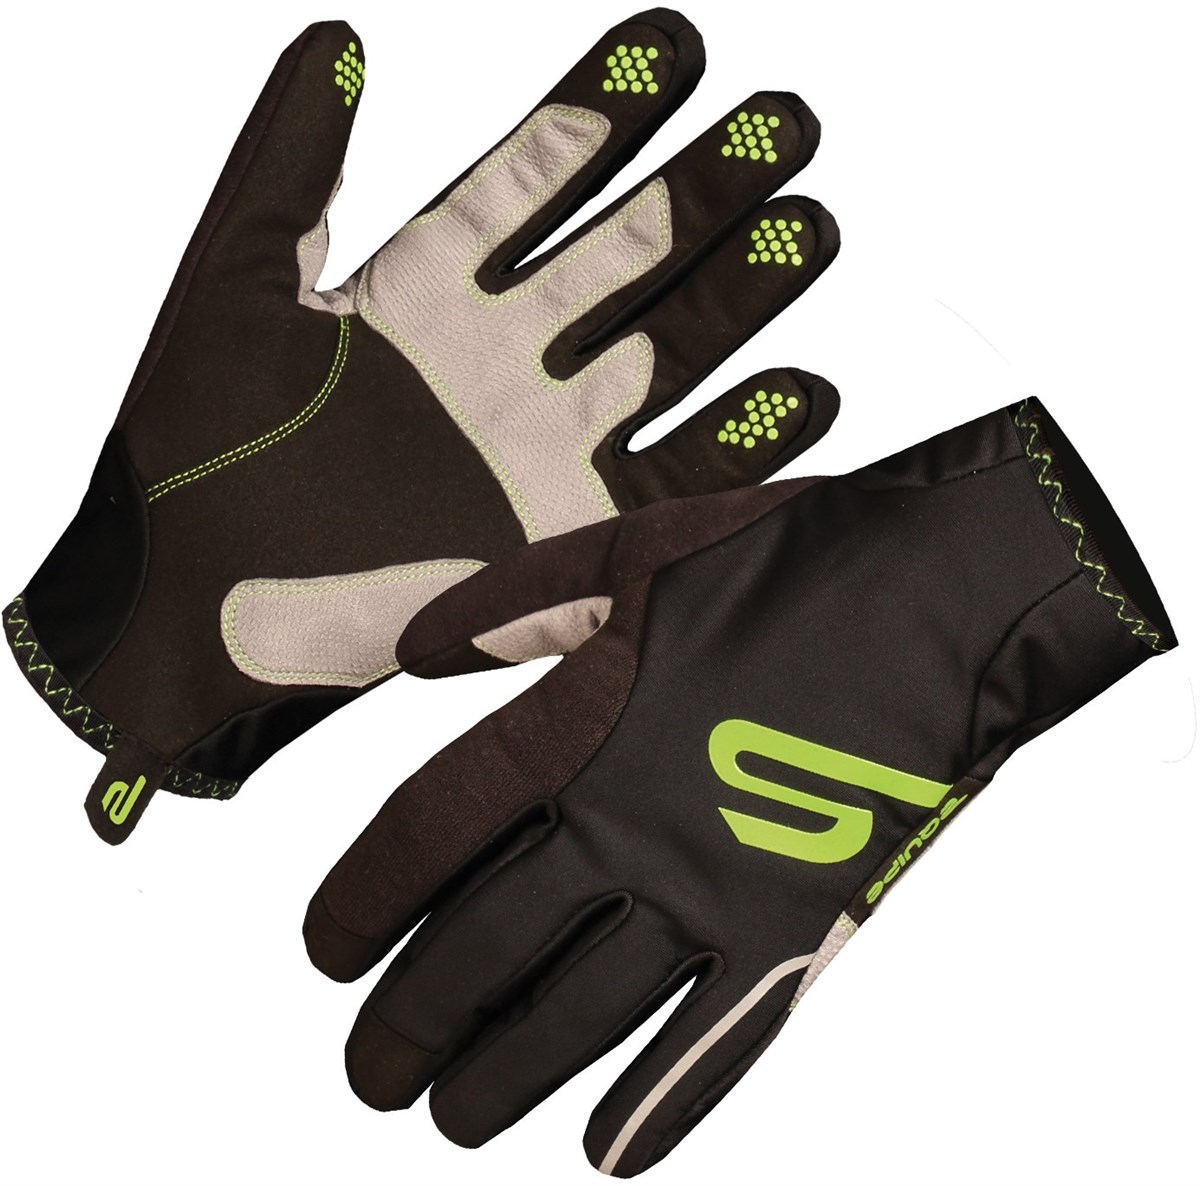 Endura Equipe Exo Waterproof Long Finger Cycling Gloves SS16 product image